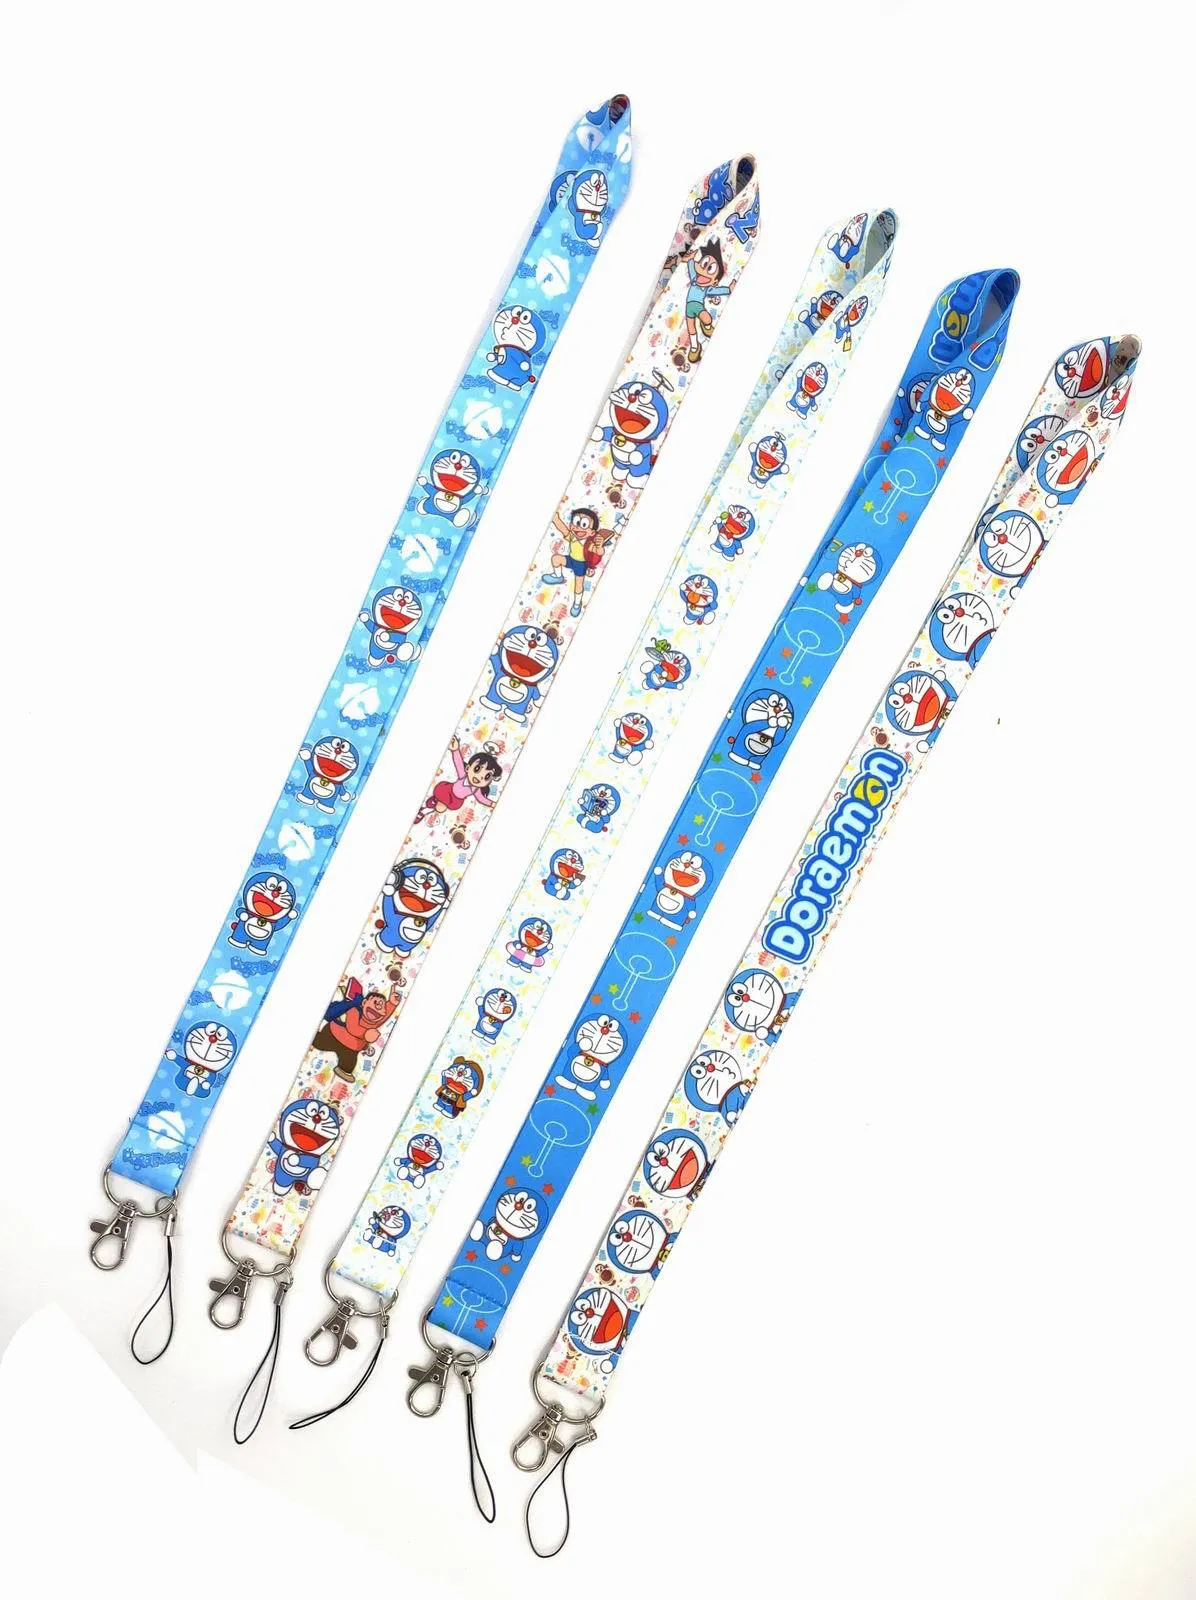 20Pcs Anime Cat Lanyards Keychain Pass Gym ID Card Badge Holder Mobile Phone case Neck Straps DIY Hang Rope Webbing Ribbon Accessories